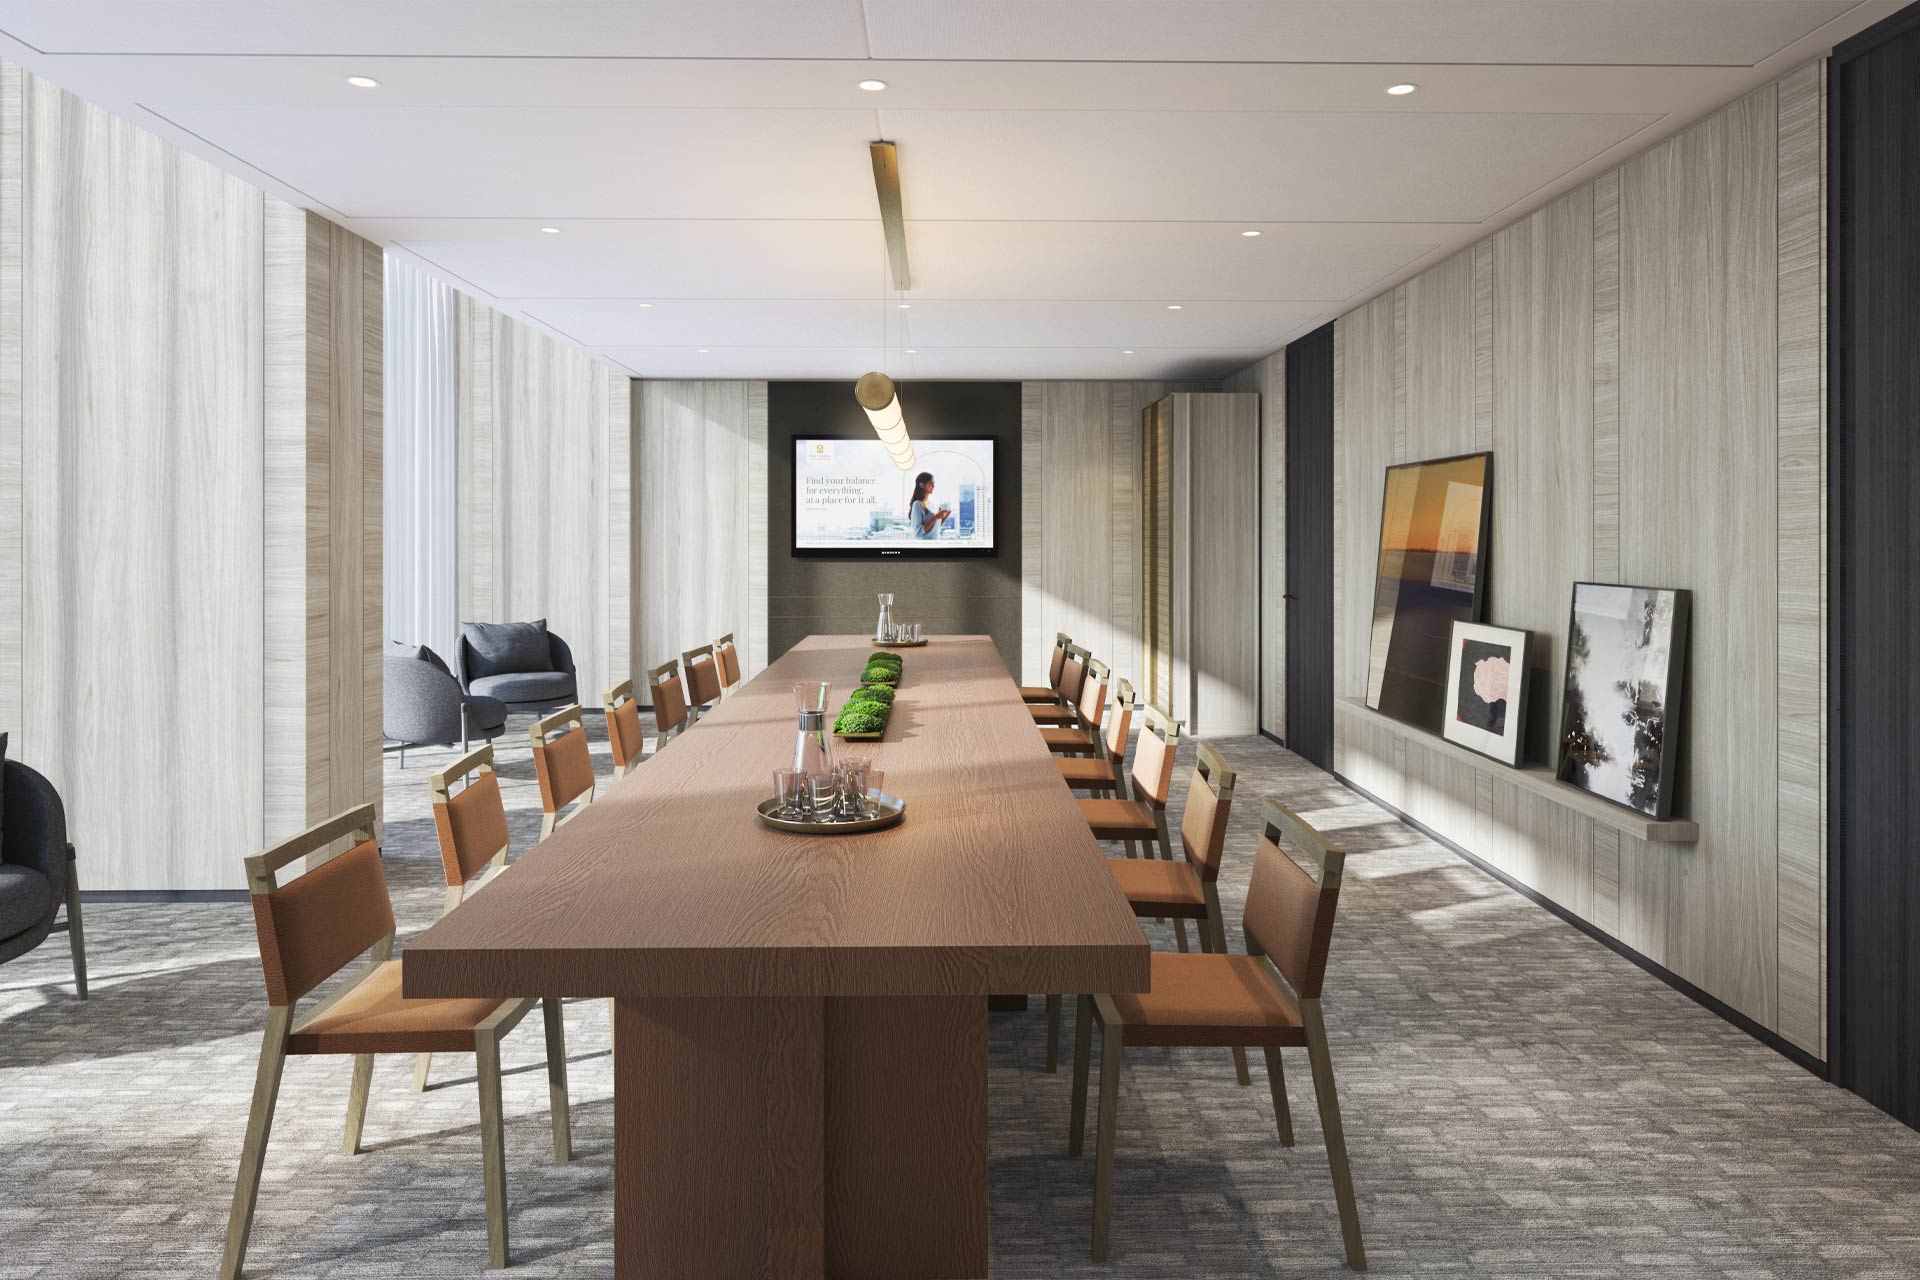 A rendering of a meeting space at Pan Pacific London